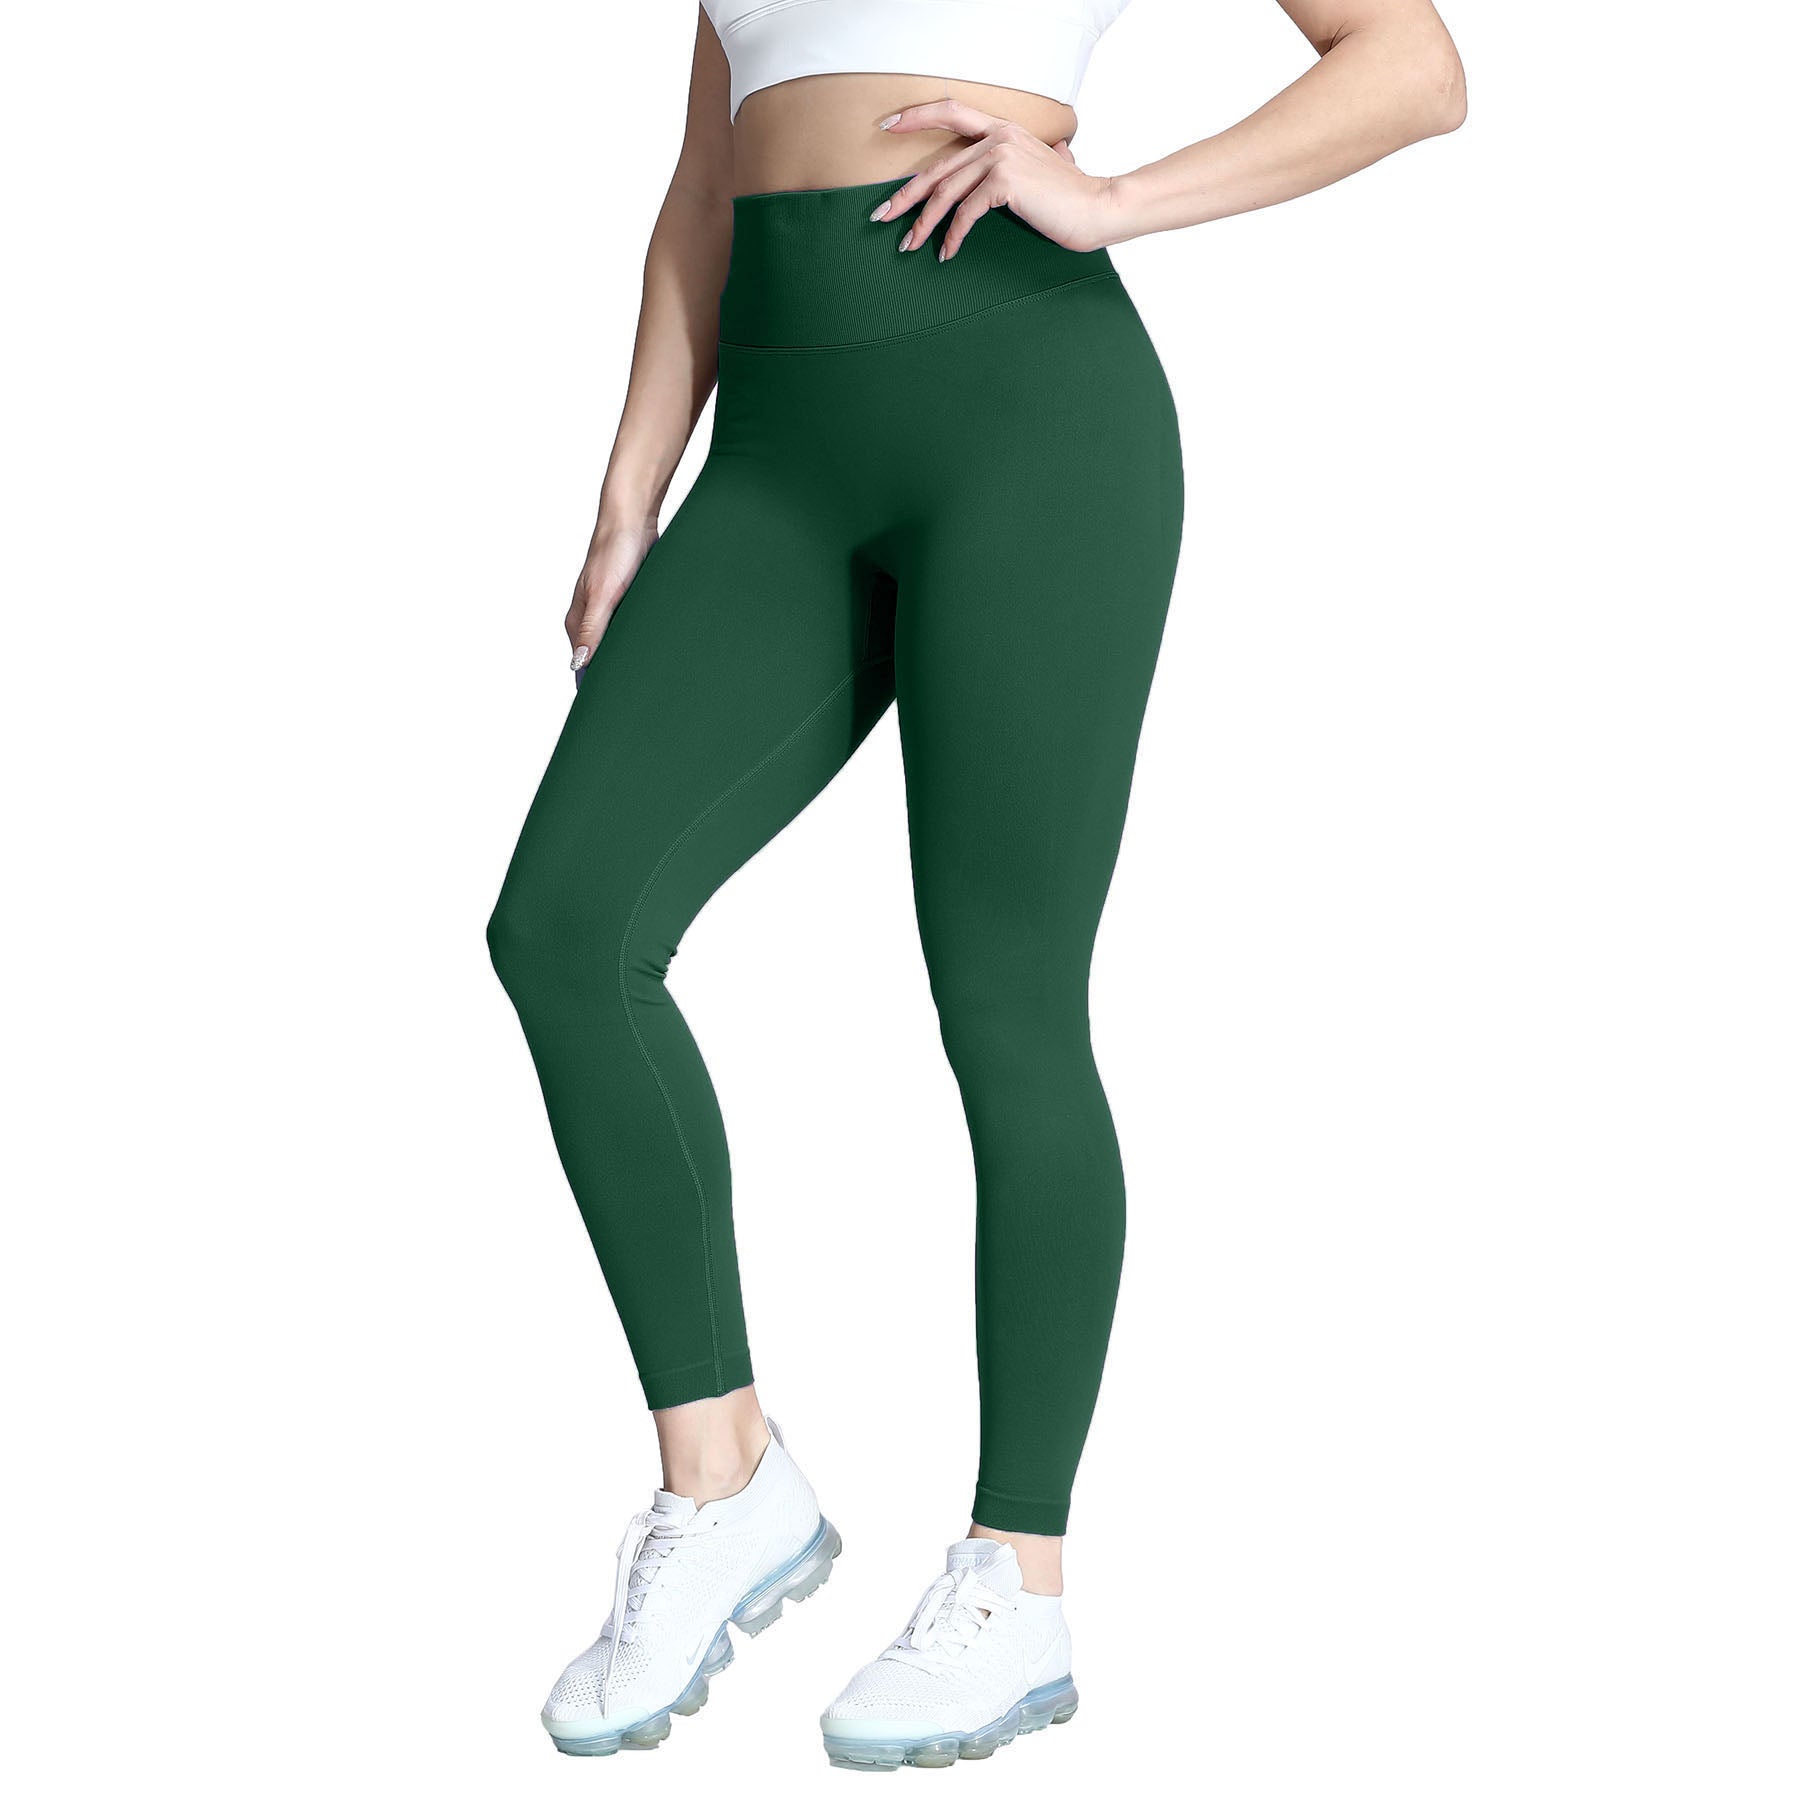 Aoxjox High Waisted Workout Leggings for Women Scrunch Tummy Control Luna  Buttery Soft Yoga Pants 27 (